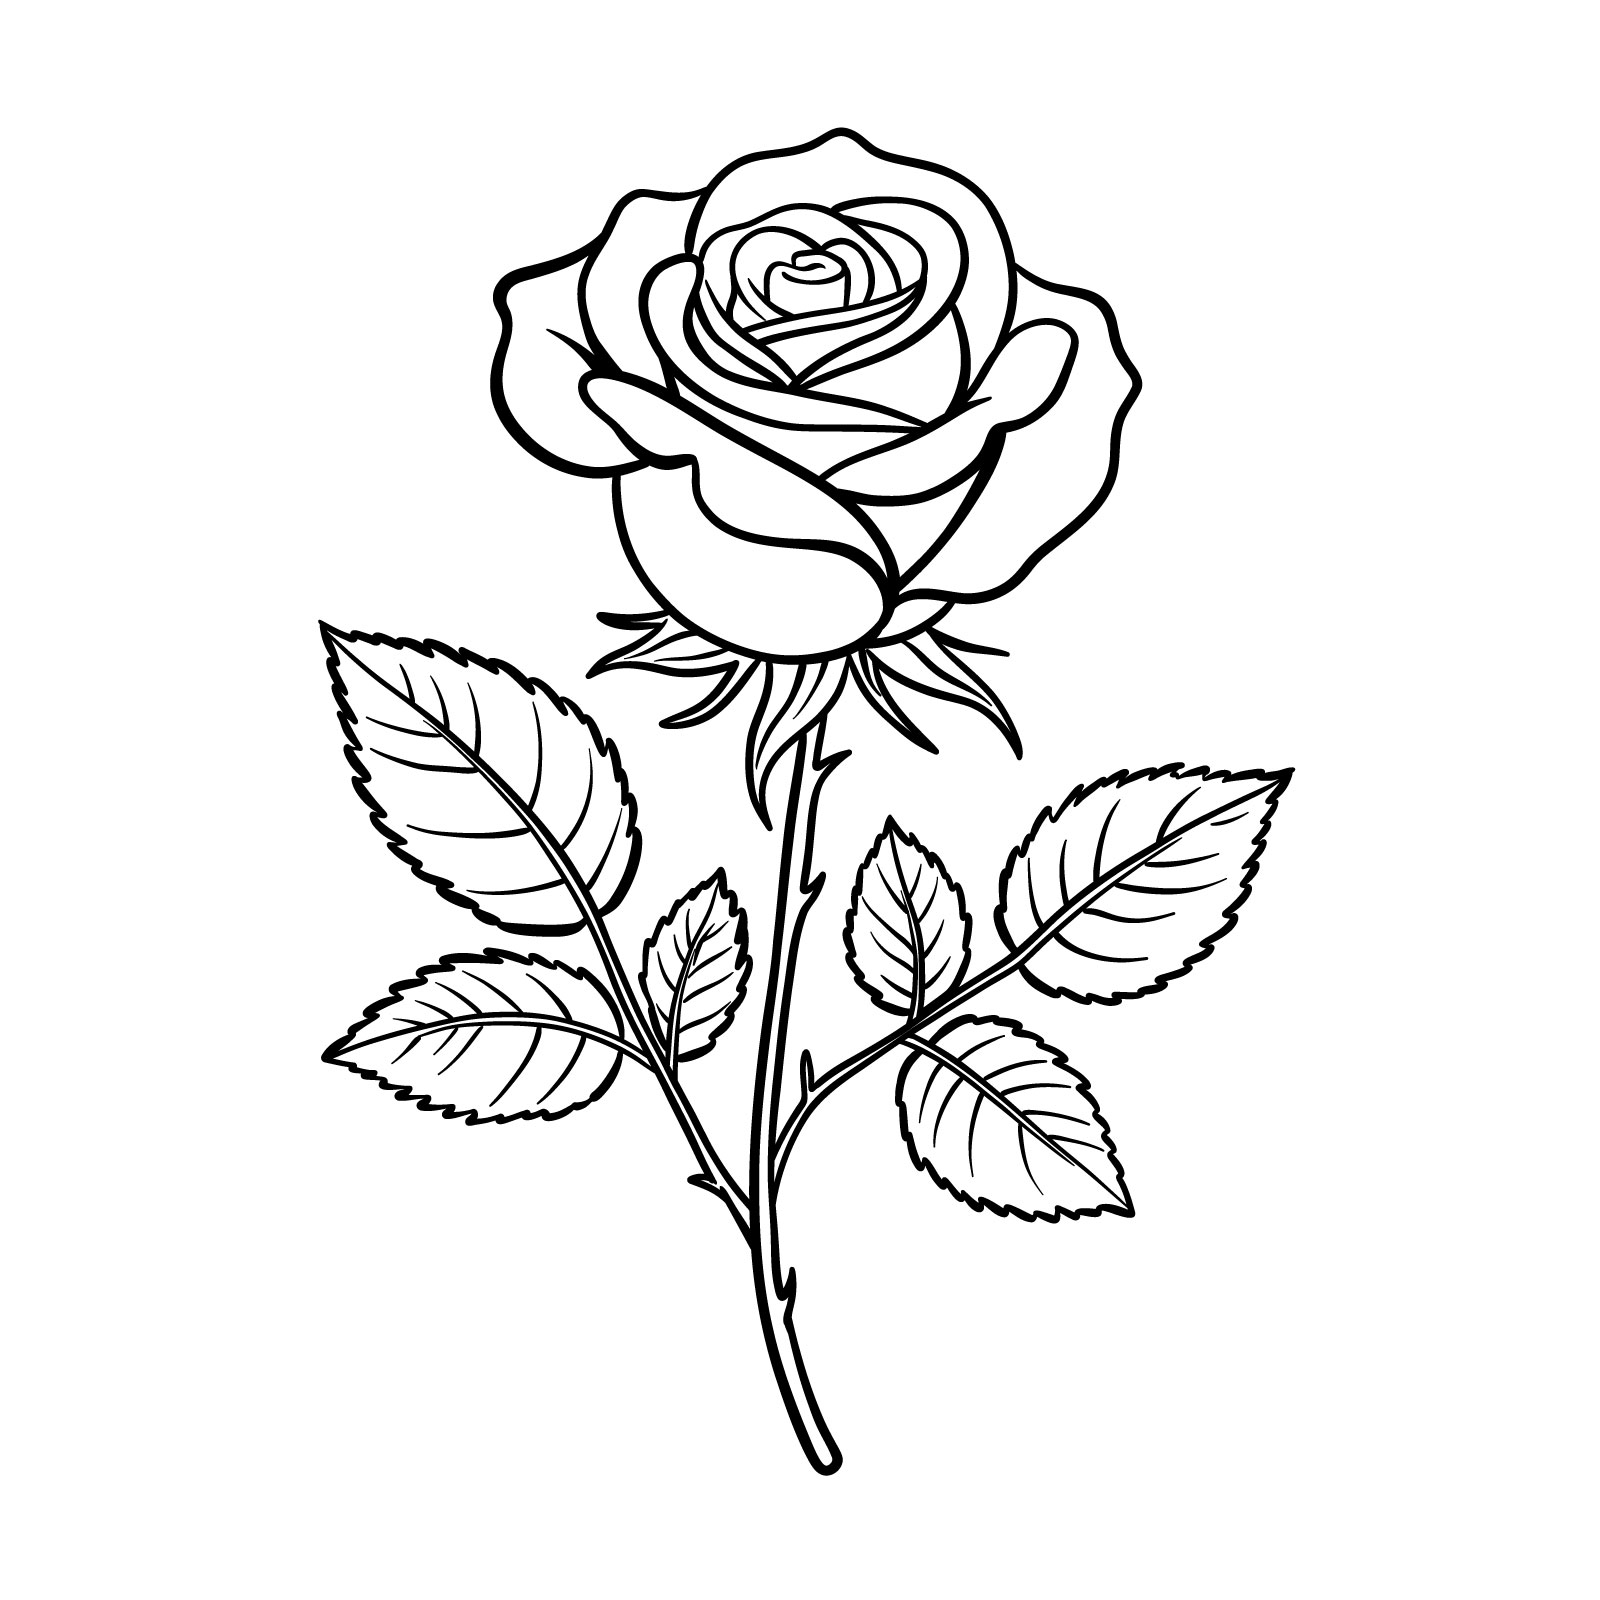 Drawing a Rose Step by Step - The Kitchen Table Classroom